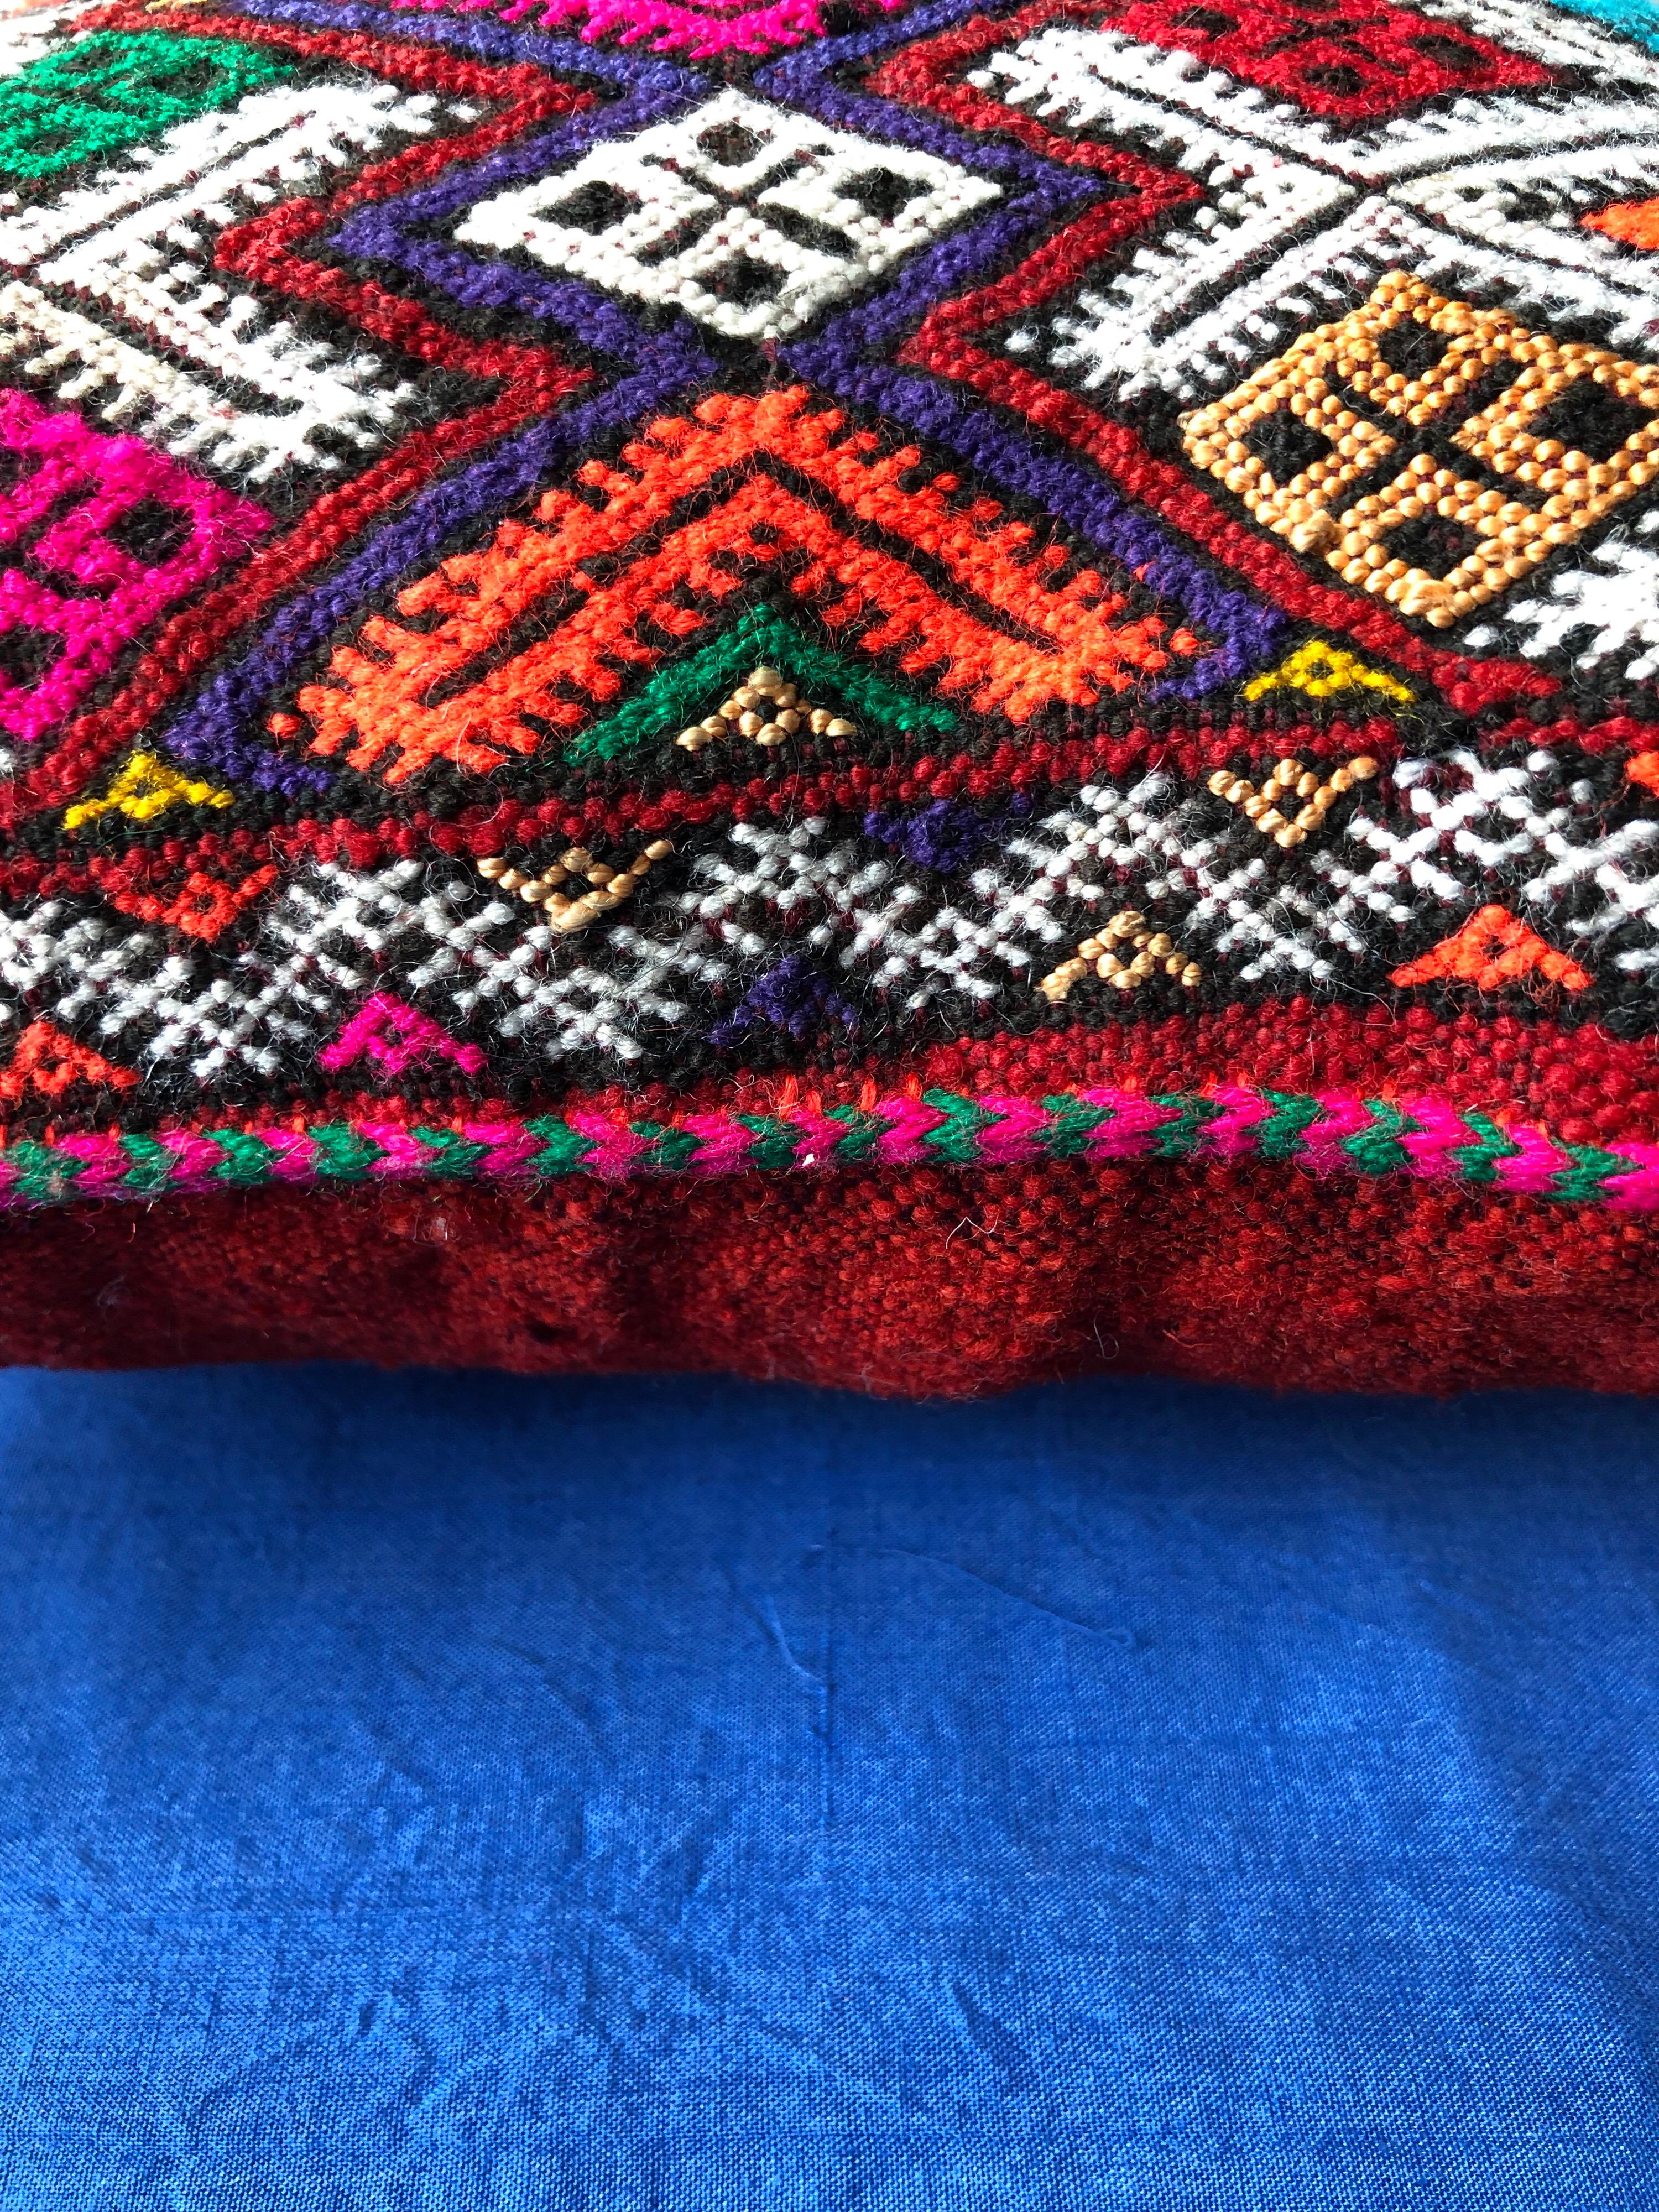 20th Century Bold Vintage Moroccan Kilim Throw Pillow Handwoven Natural Red Wool Berber Boho